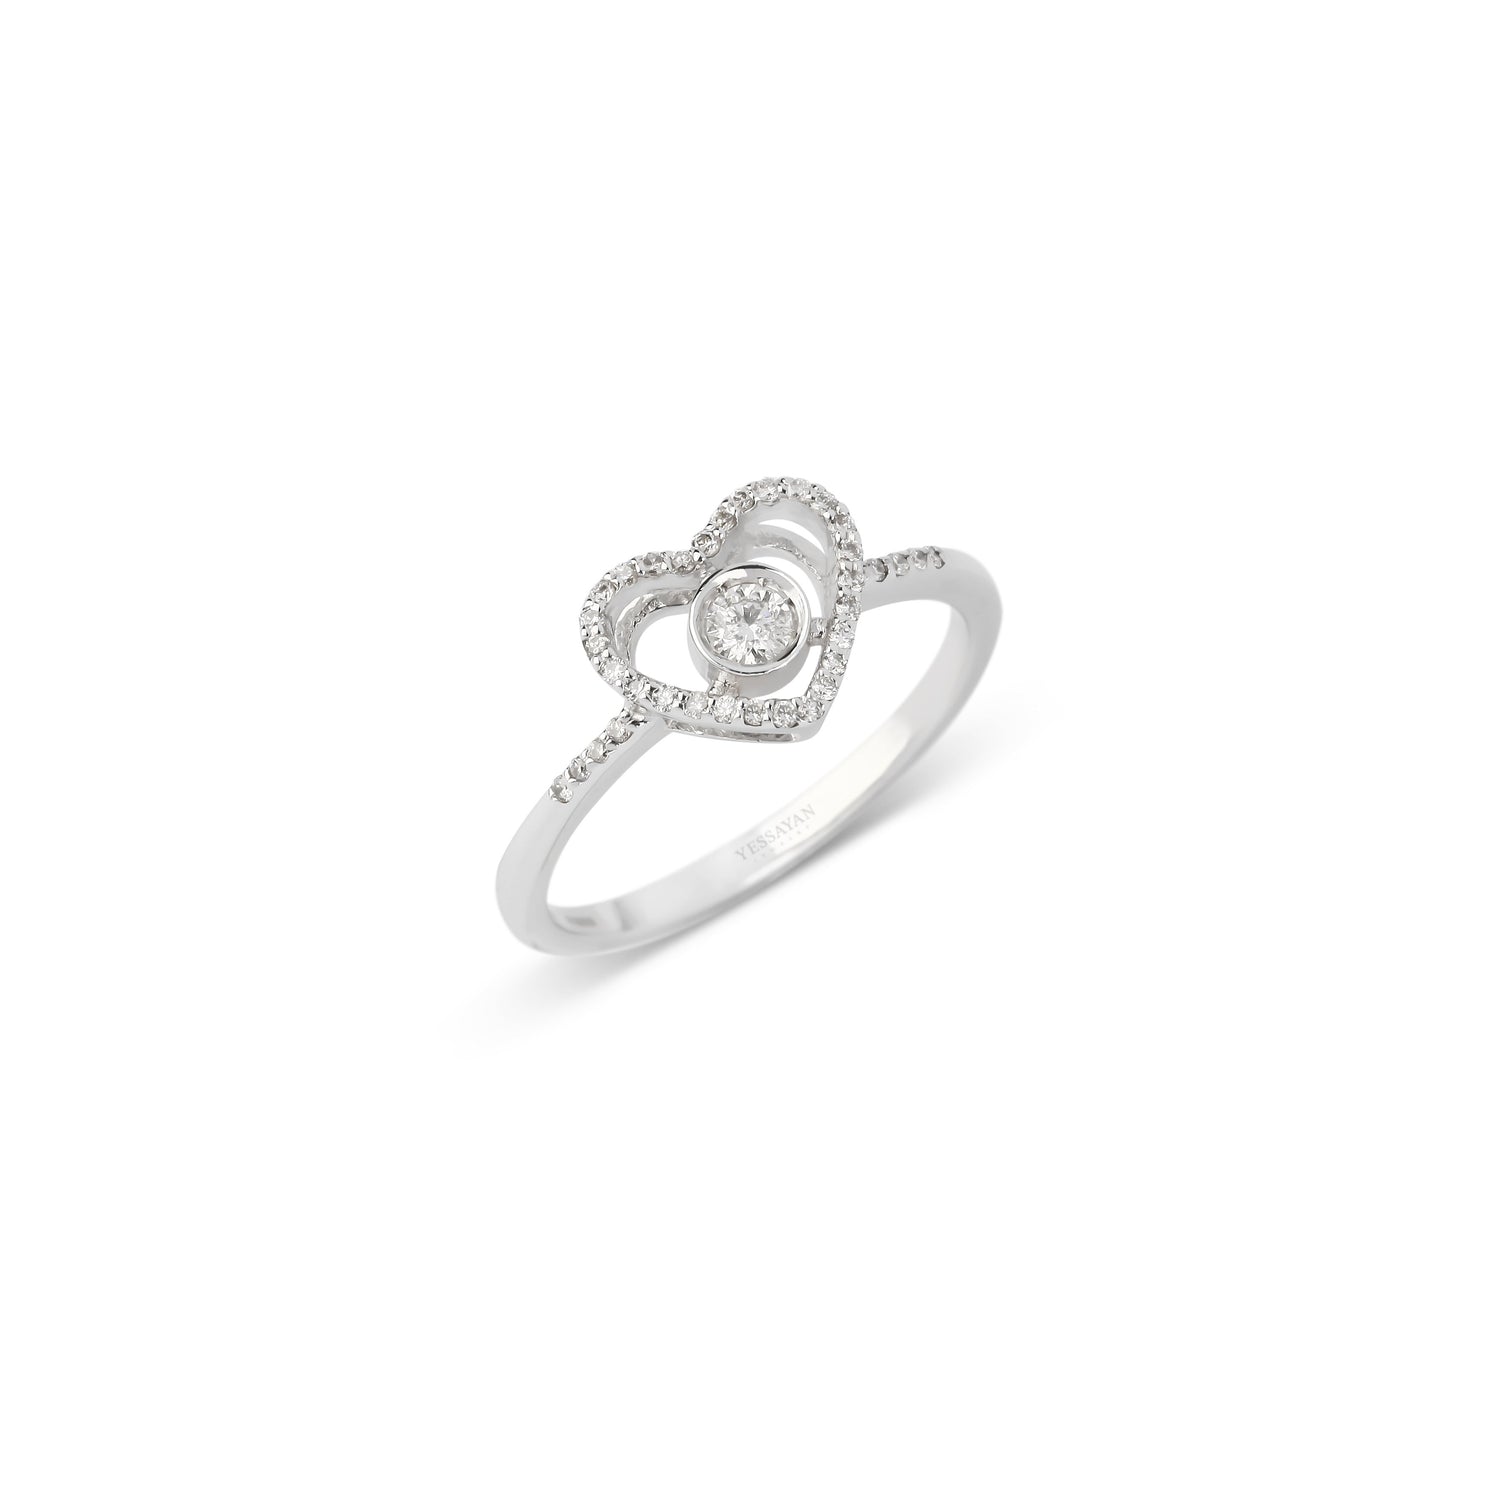 Diamond Heart Ring | Solitaire ring | Wedding ring